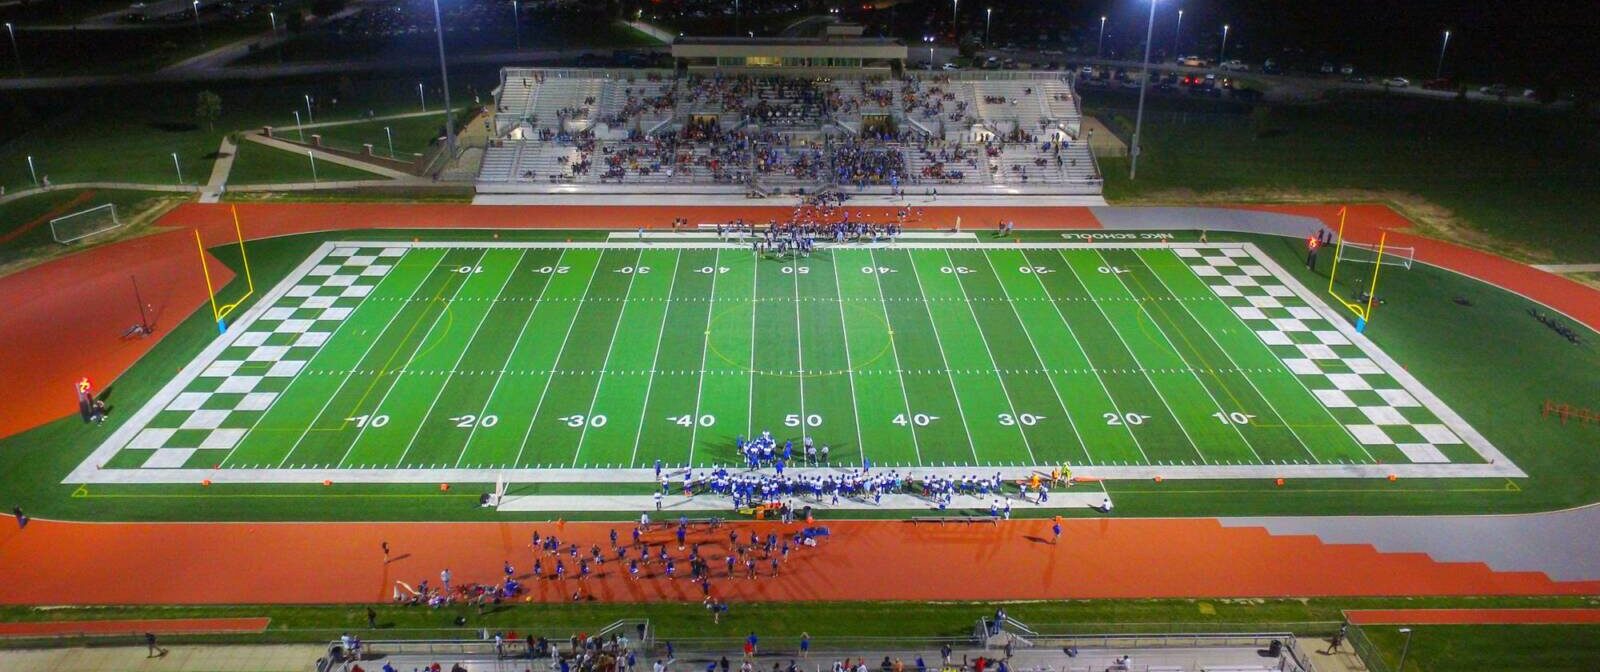 Drone shot of high school football field with checkered end zones corresponding with an orange and gray track